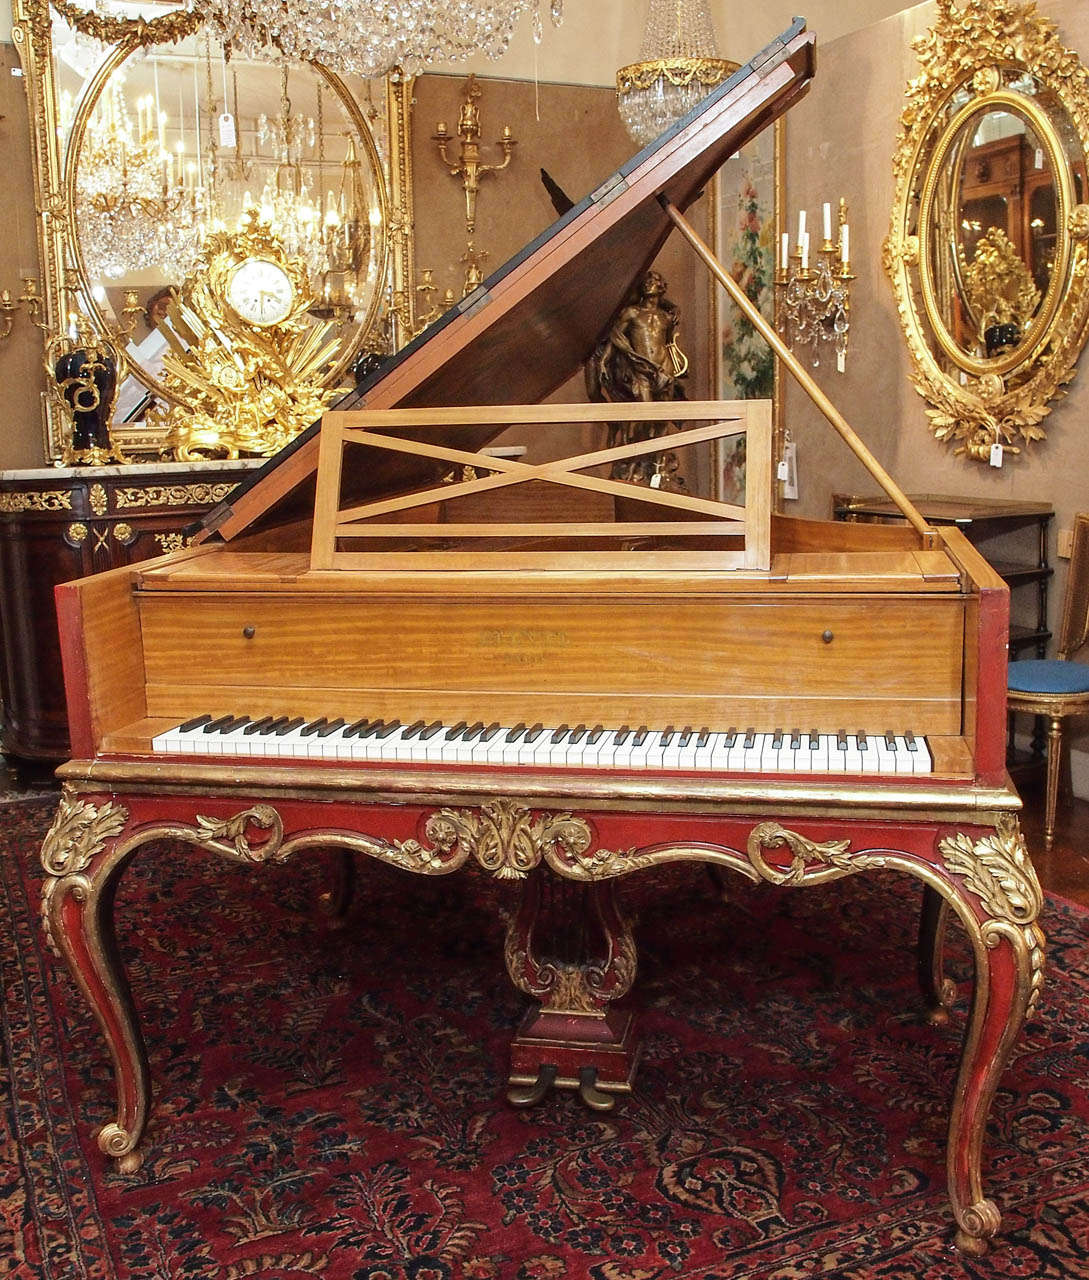 Pleyel was the piano used by Frederic Chopin.